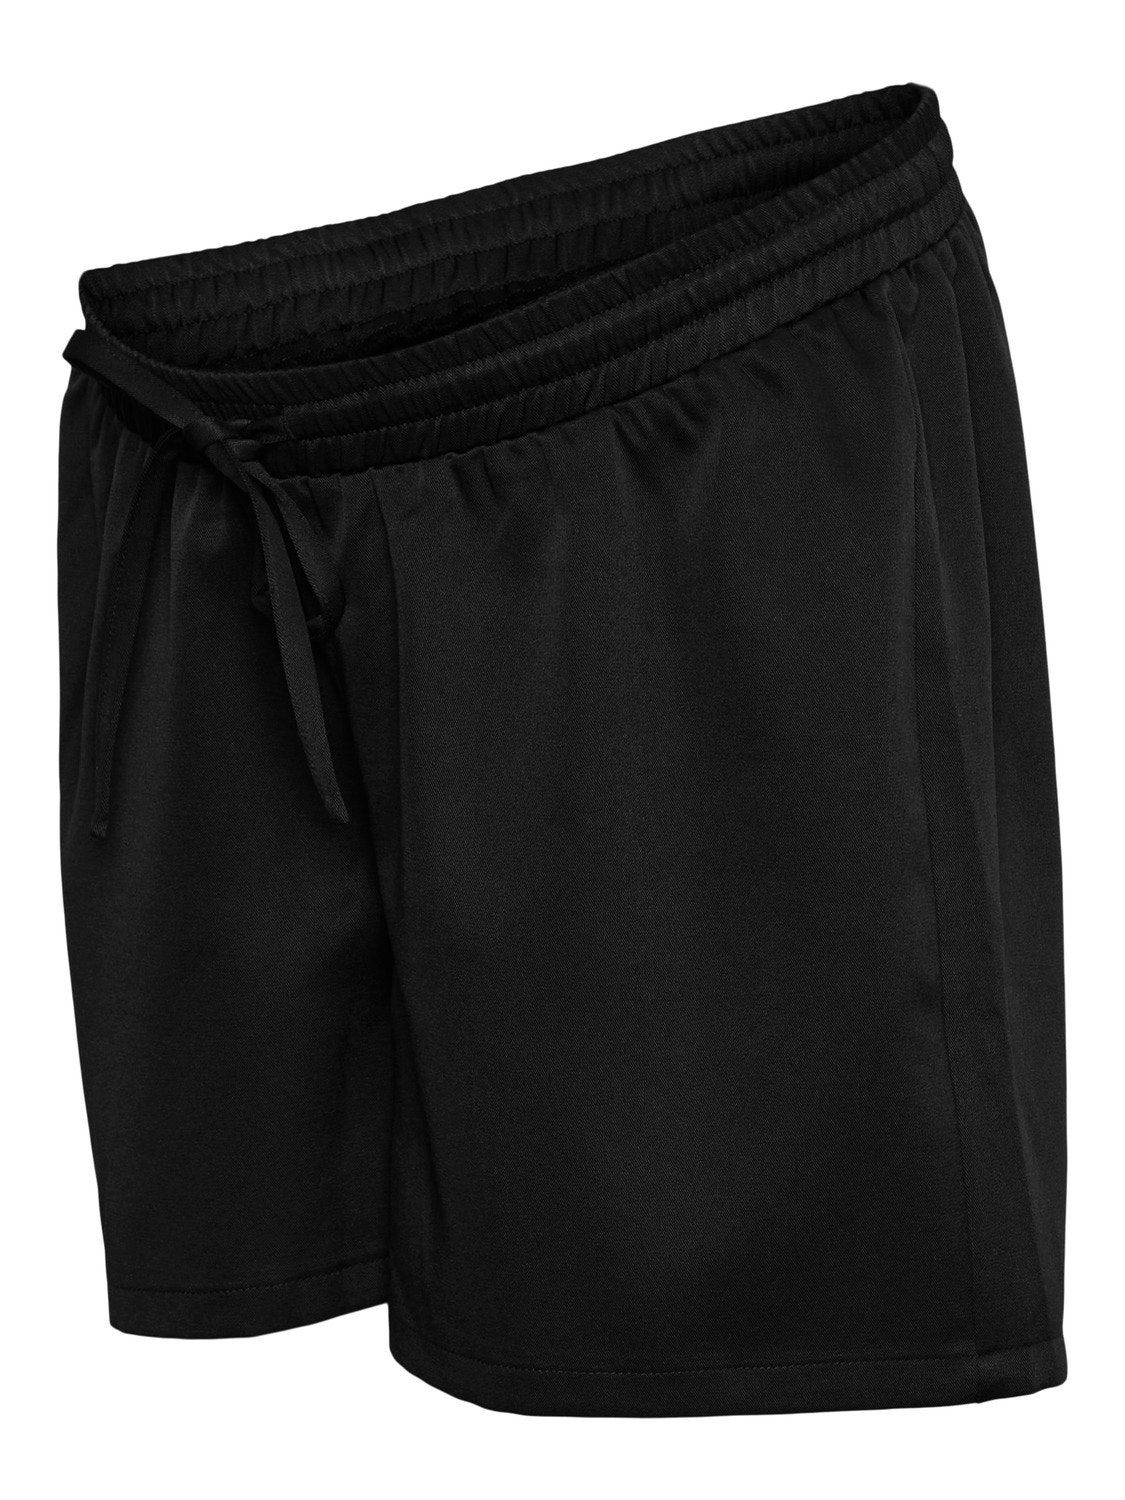 MAMA.LICIOUS Shorts Regular Fit Taille basse -Black - 20016839